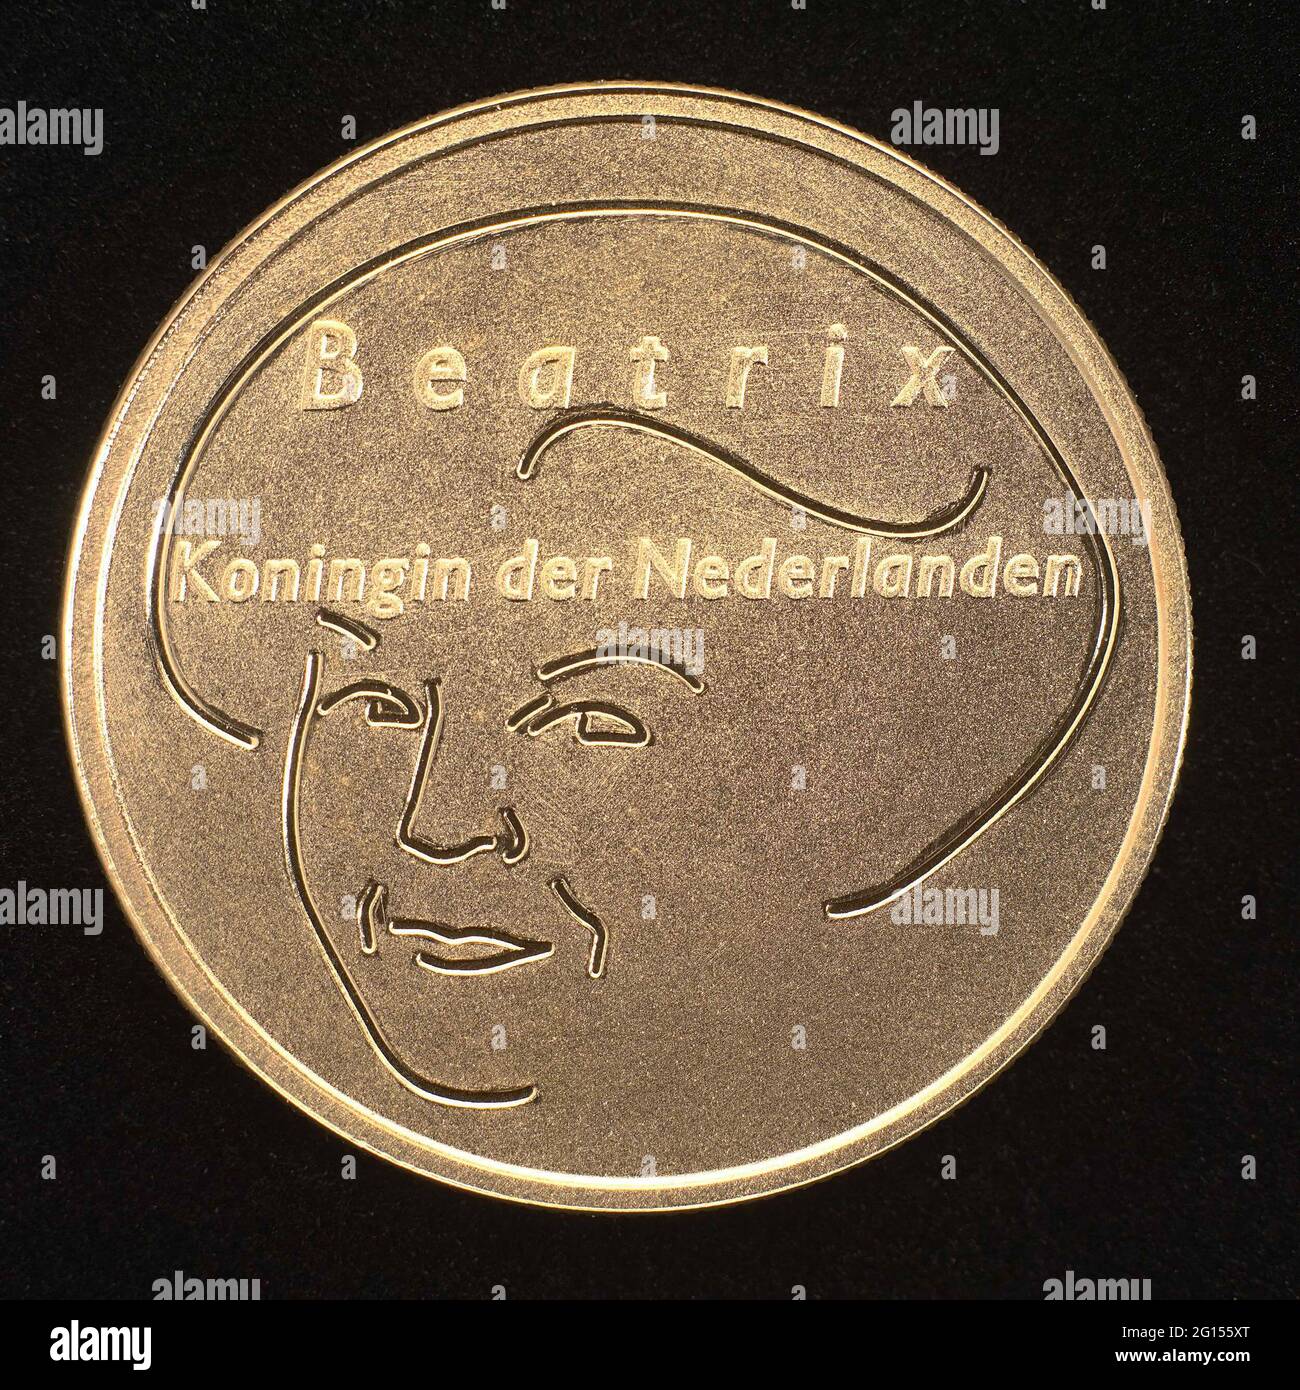 Golden Europamunt of 10 euros. Ten euro coins with on front in lines built  up portrait of Queen Beatrix with inscription and on the right mint value  and in circumcision. The name